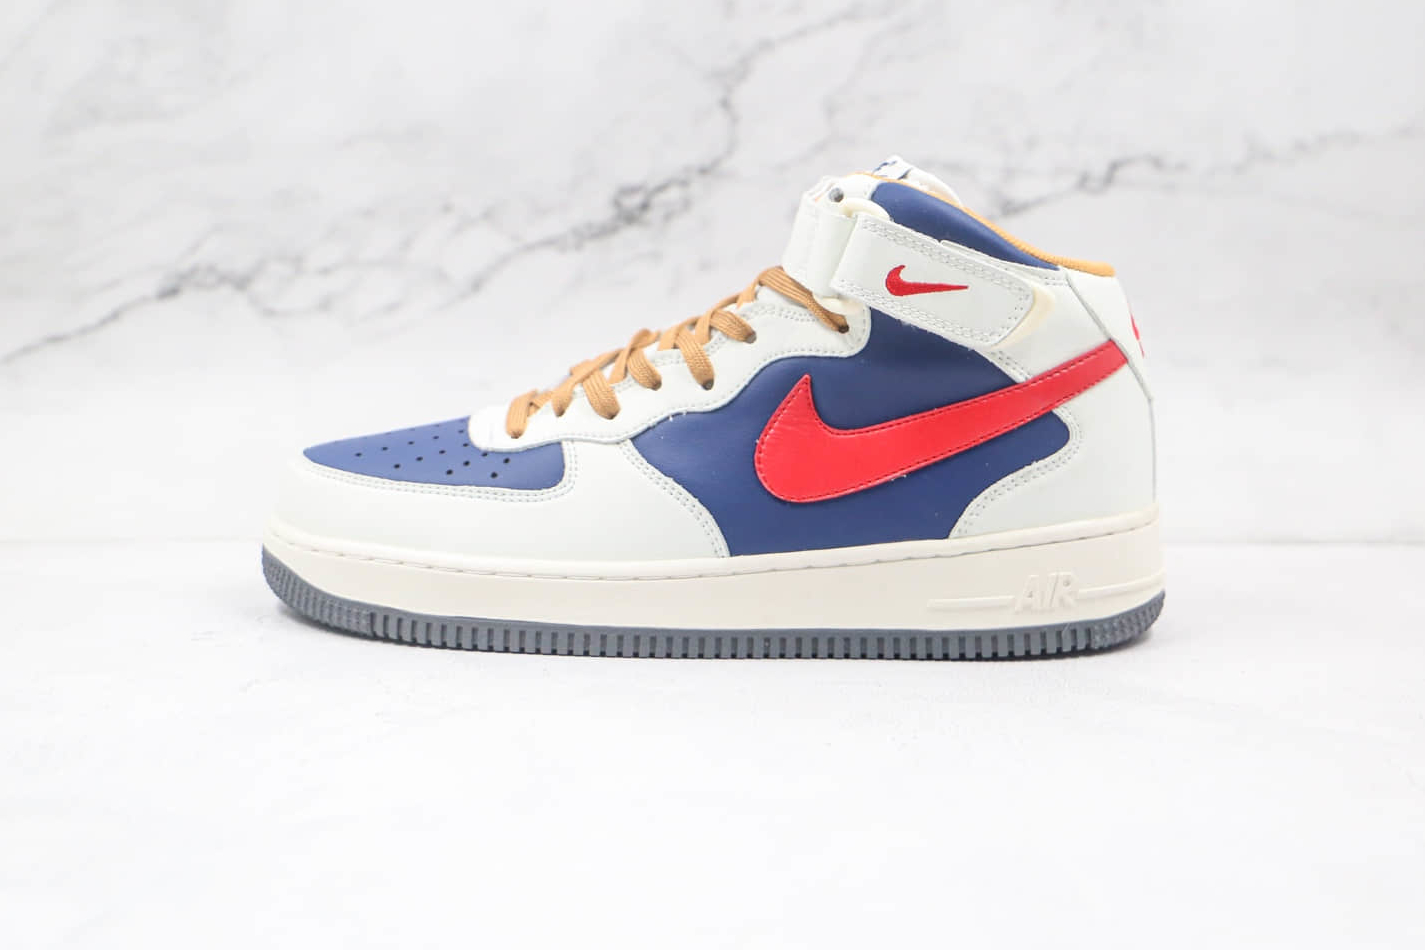 Nike Air Force 1 07 Mid Beige Dark Blue University Red 512745-068 - Shop the Latest Nike AF1 Mid Sneakers!